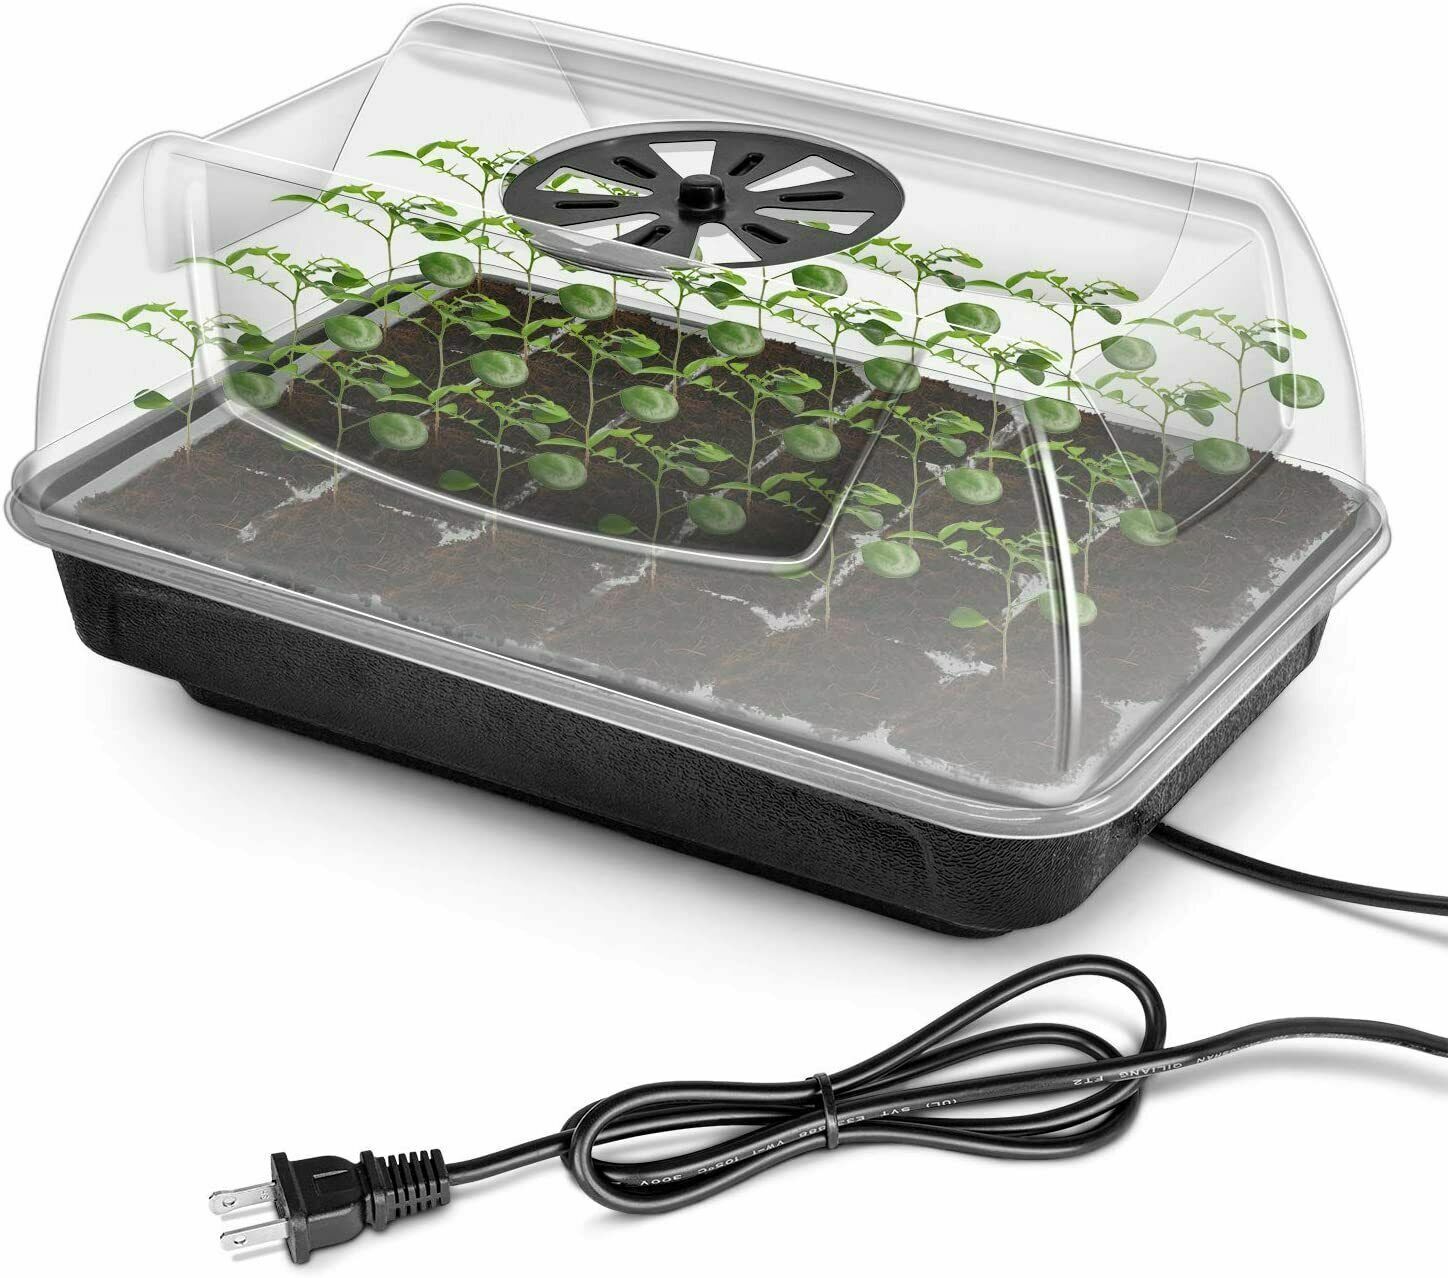 iPower Heating Seed Starter Germination Seedling Propagation Tray with Heater